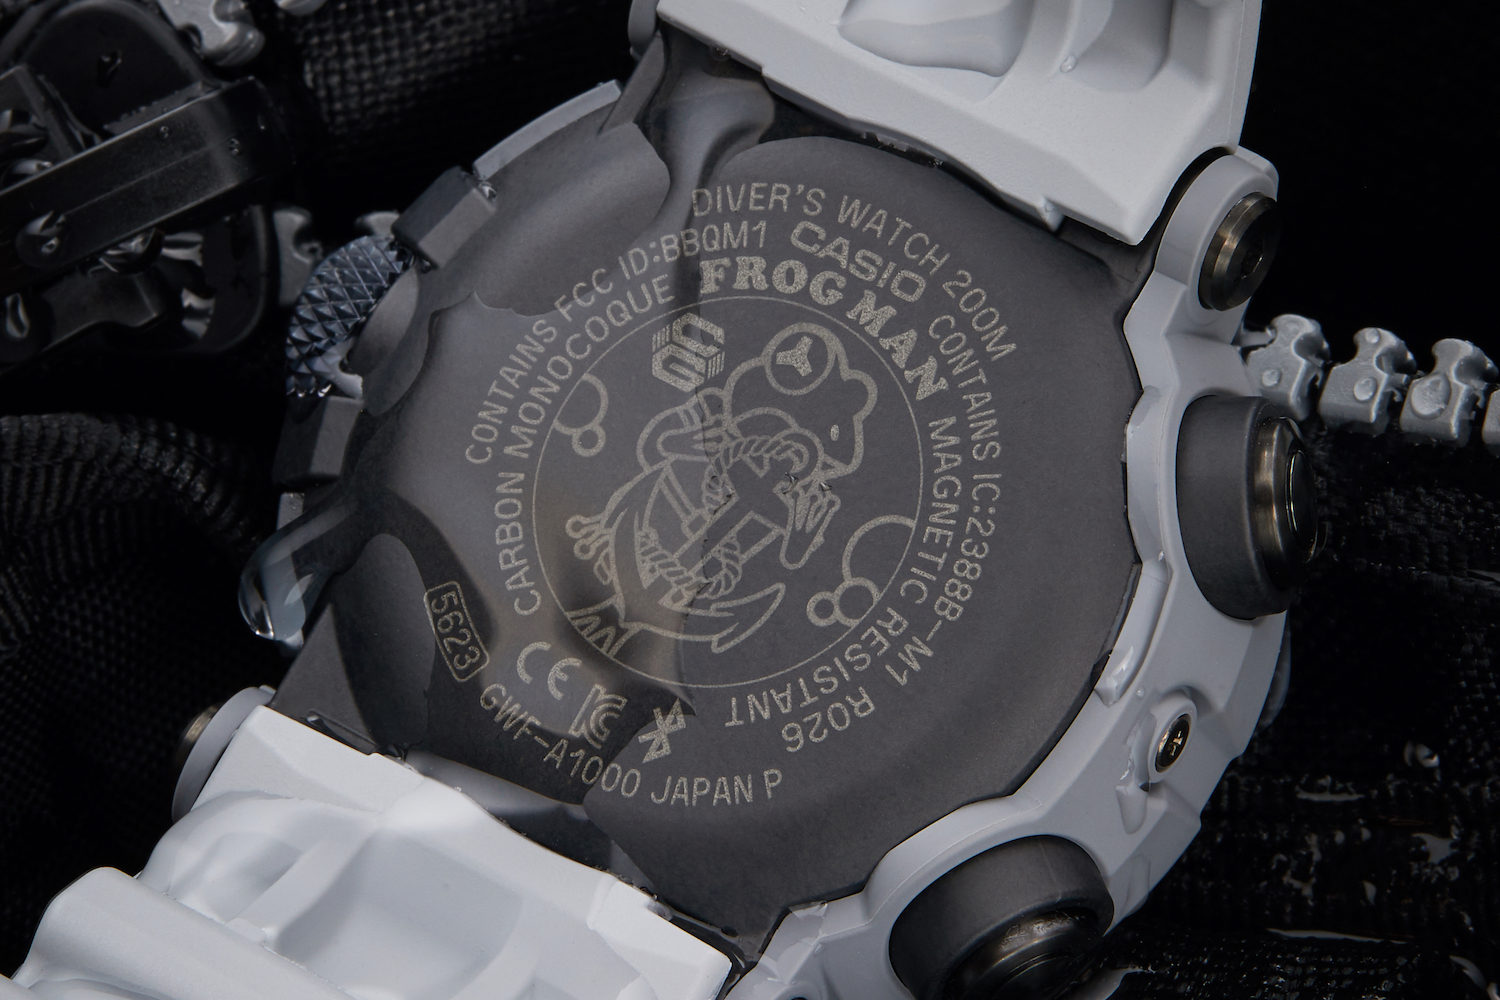 Dive in to the Royal Navy x G-Shock Special Edition Watch